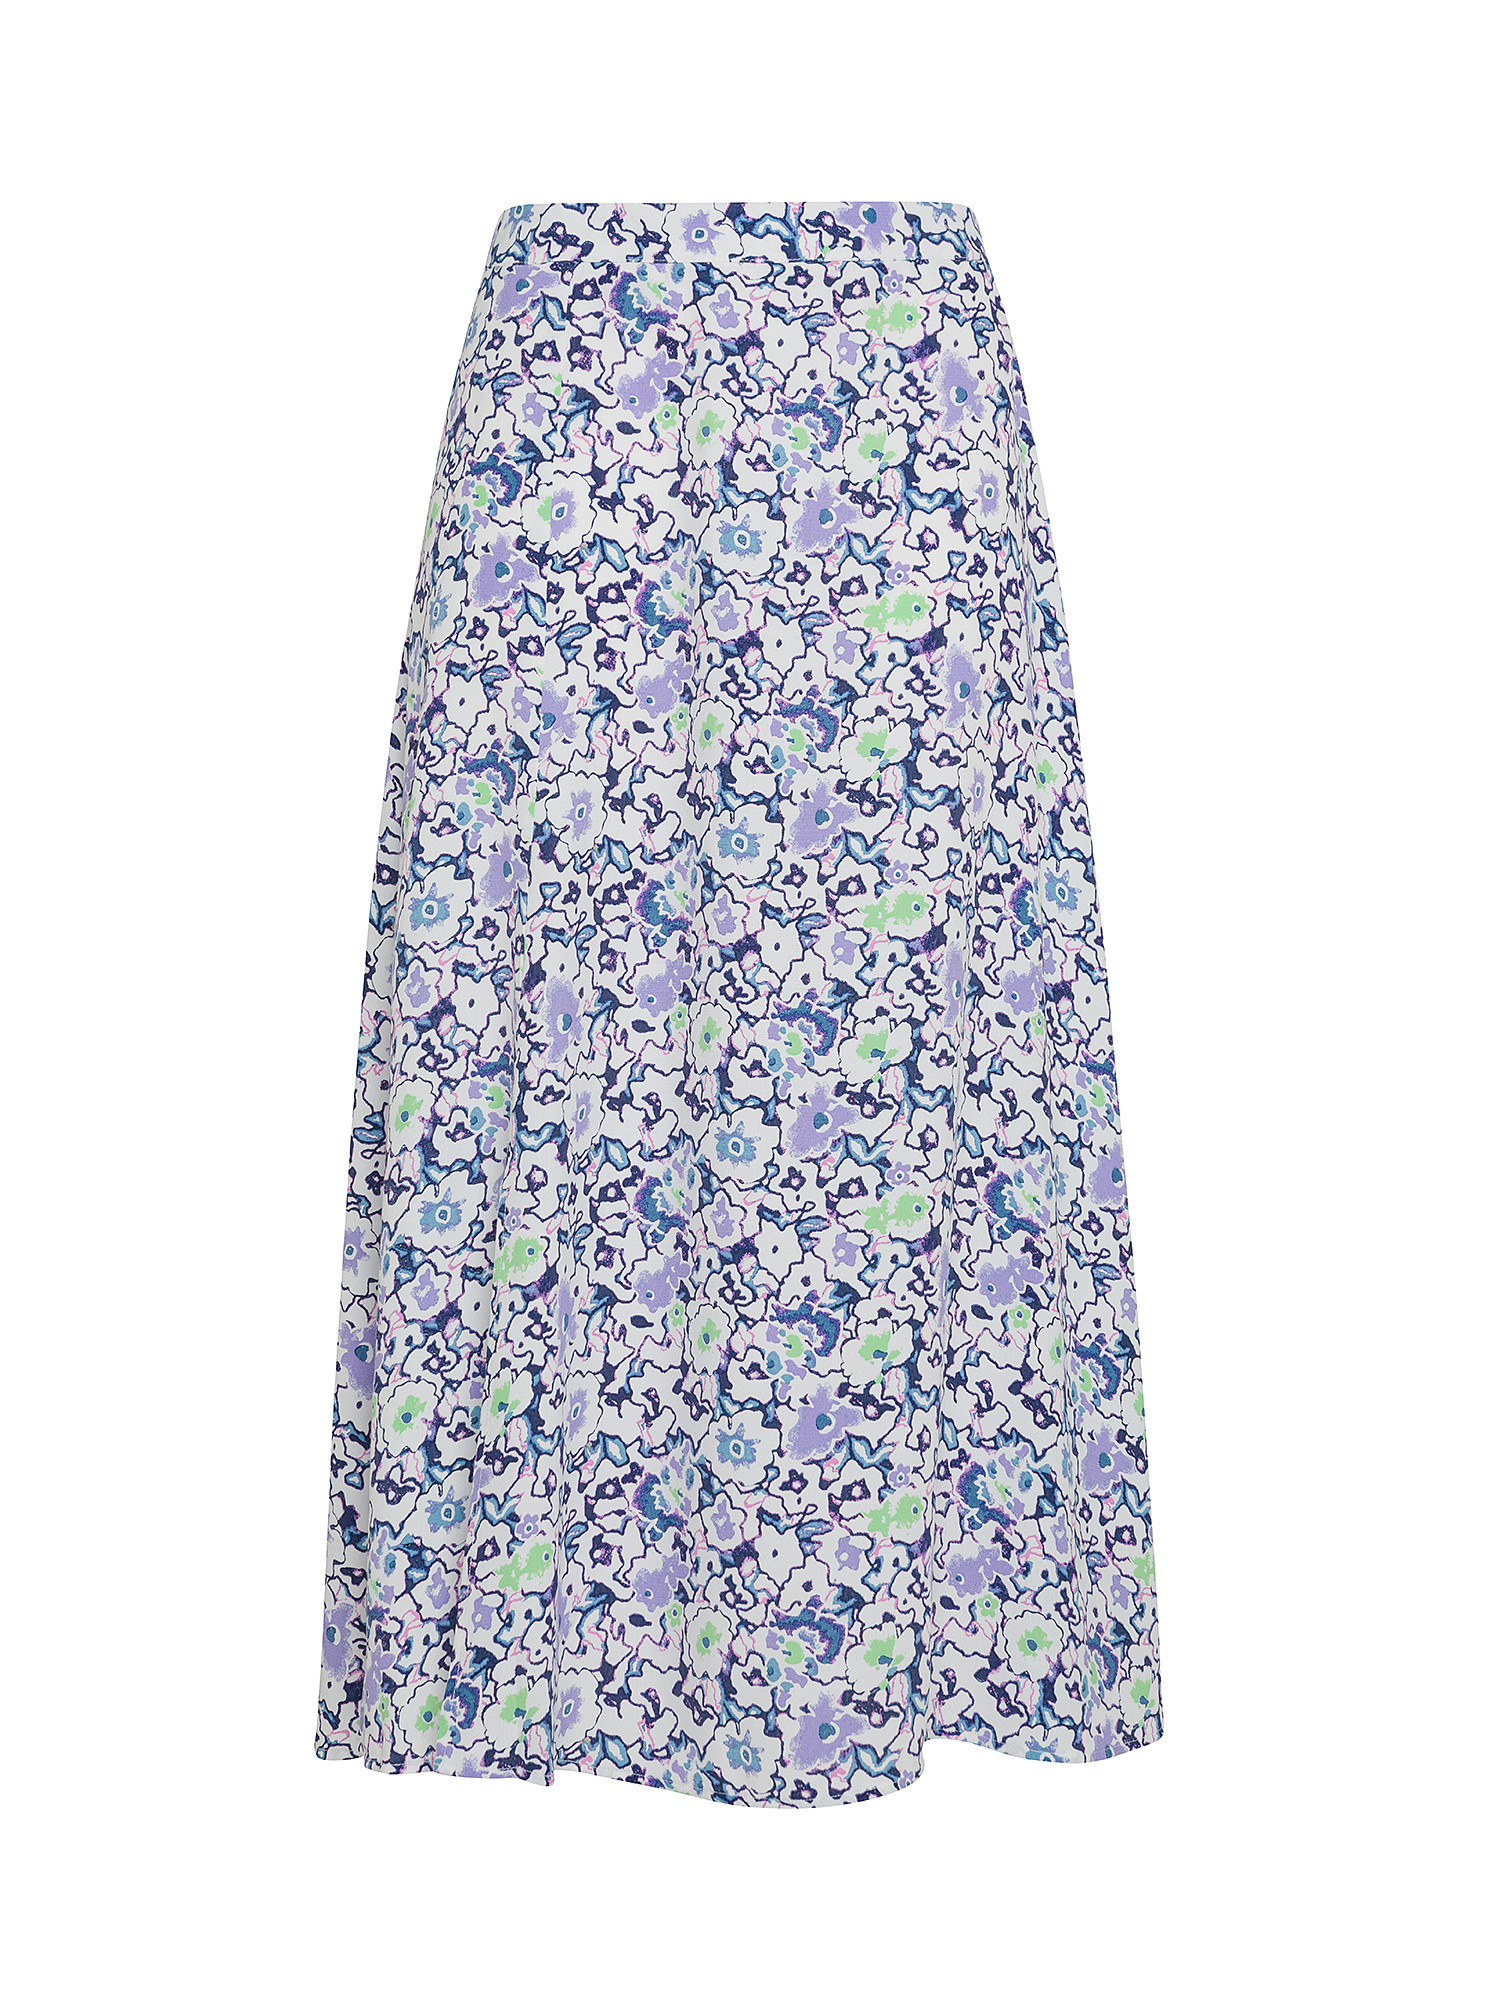 Esprit - Midi skirt with all over floral motif, White, large image number 0